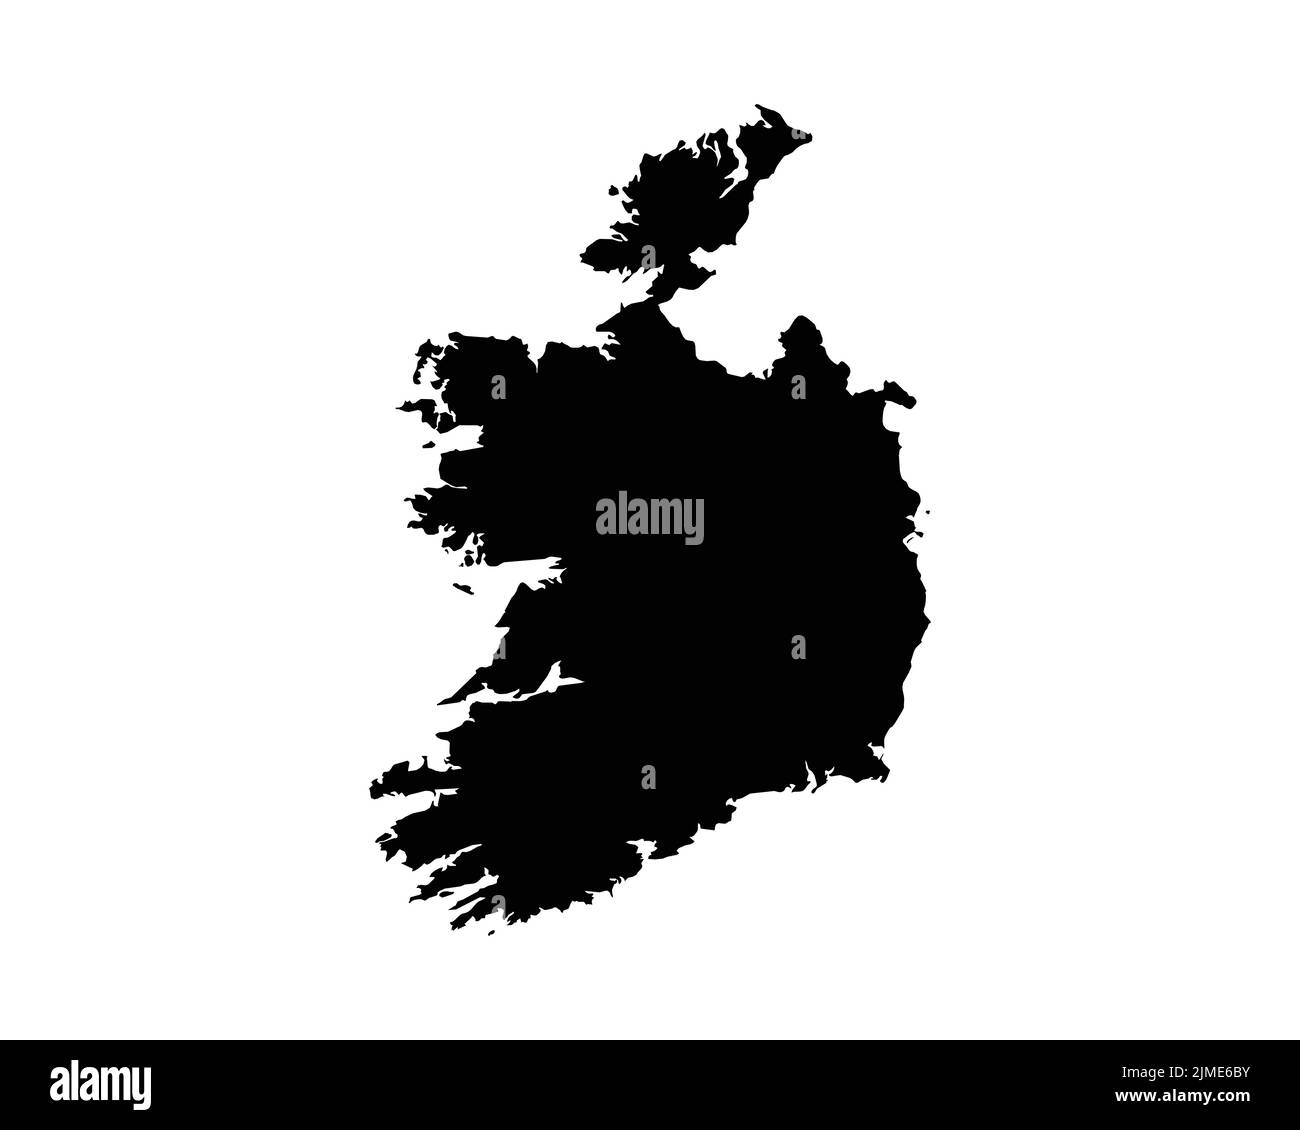 Republic of Ireland Map. Irish Country Map. Black and White Ireland National Nation Outline Geography Border Boundary Shape Territory Vector Illustrat Stock Vector